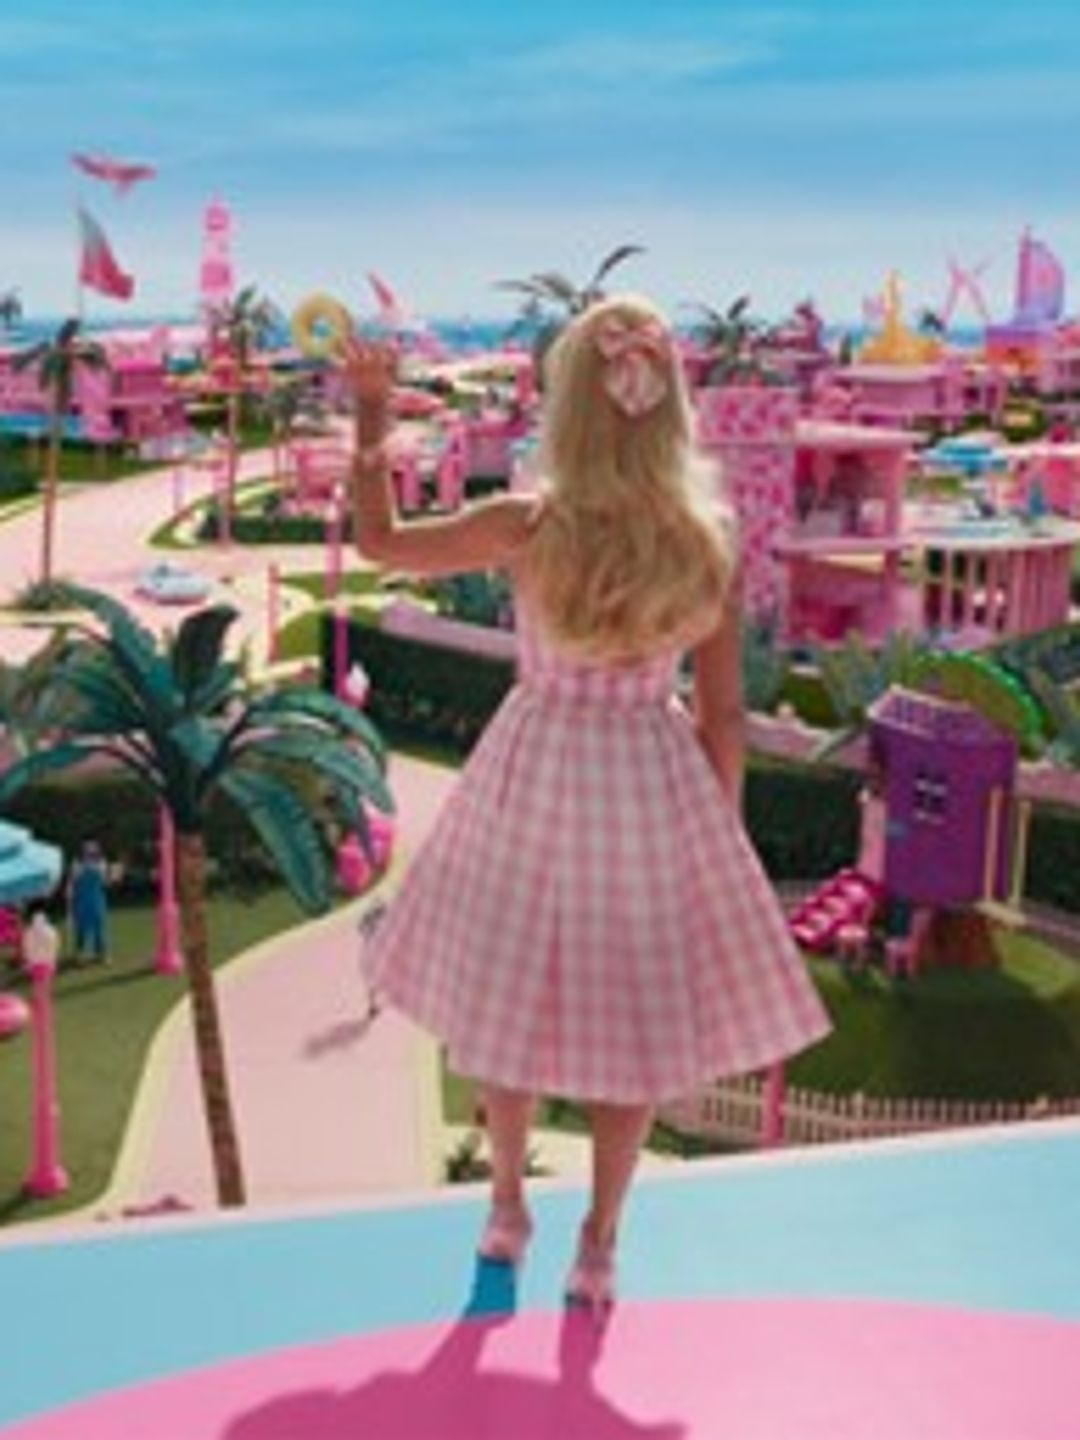 Margot Robbie played a 'stereotypical' Barbie